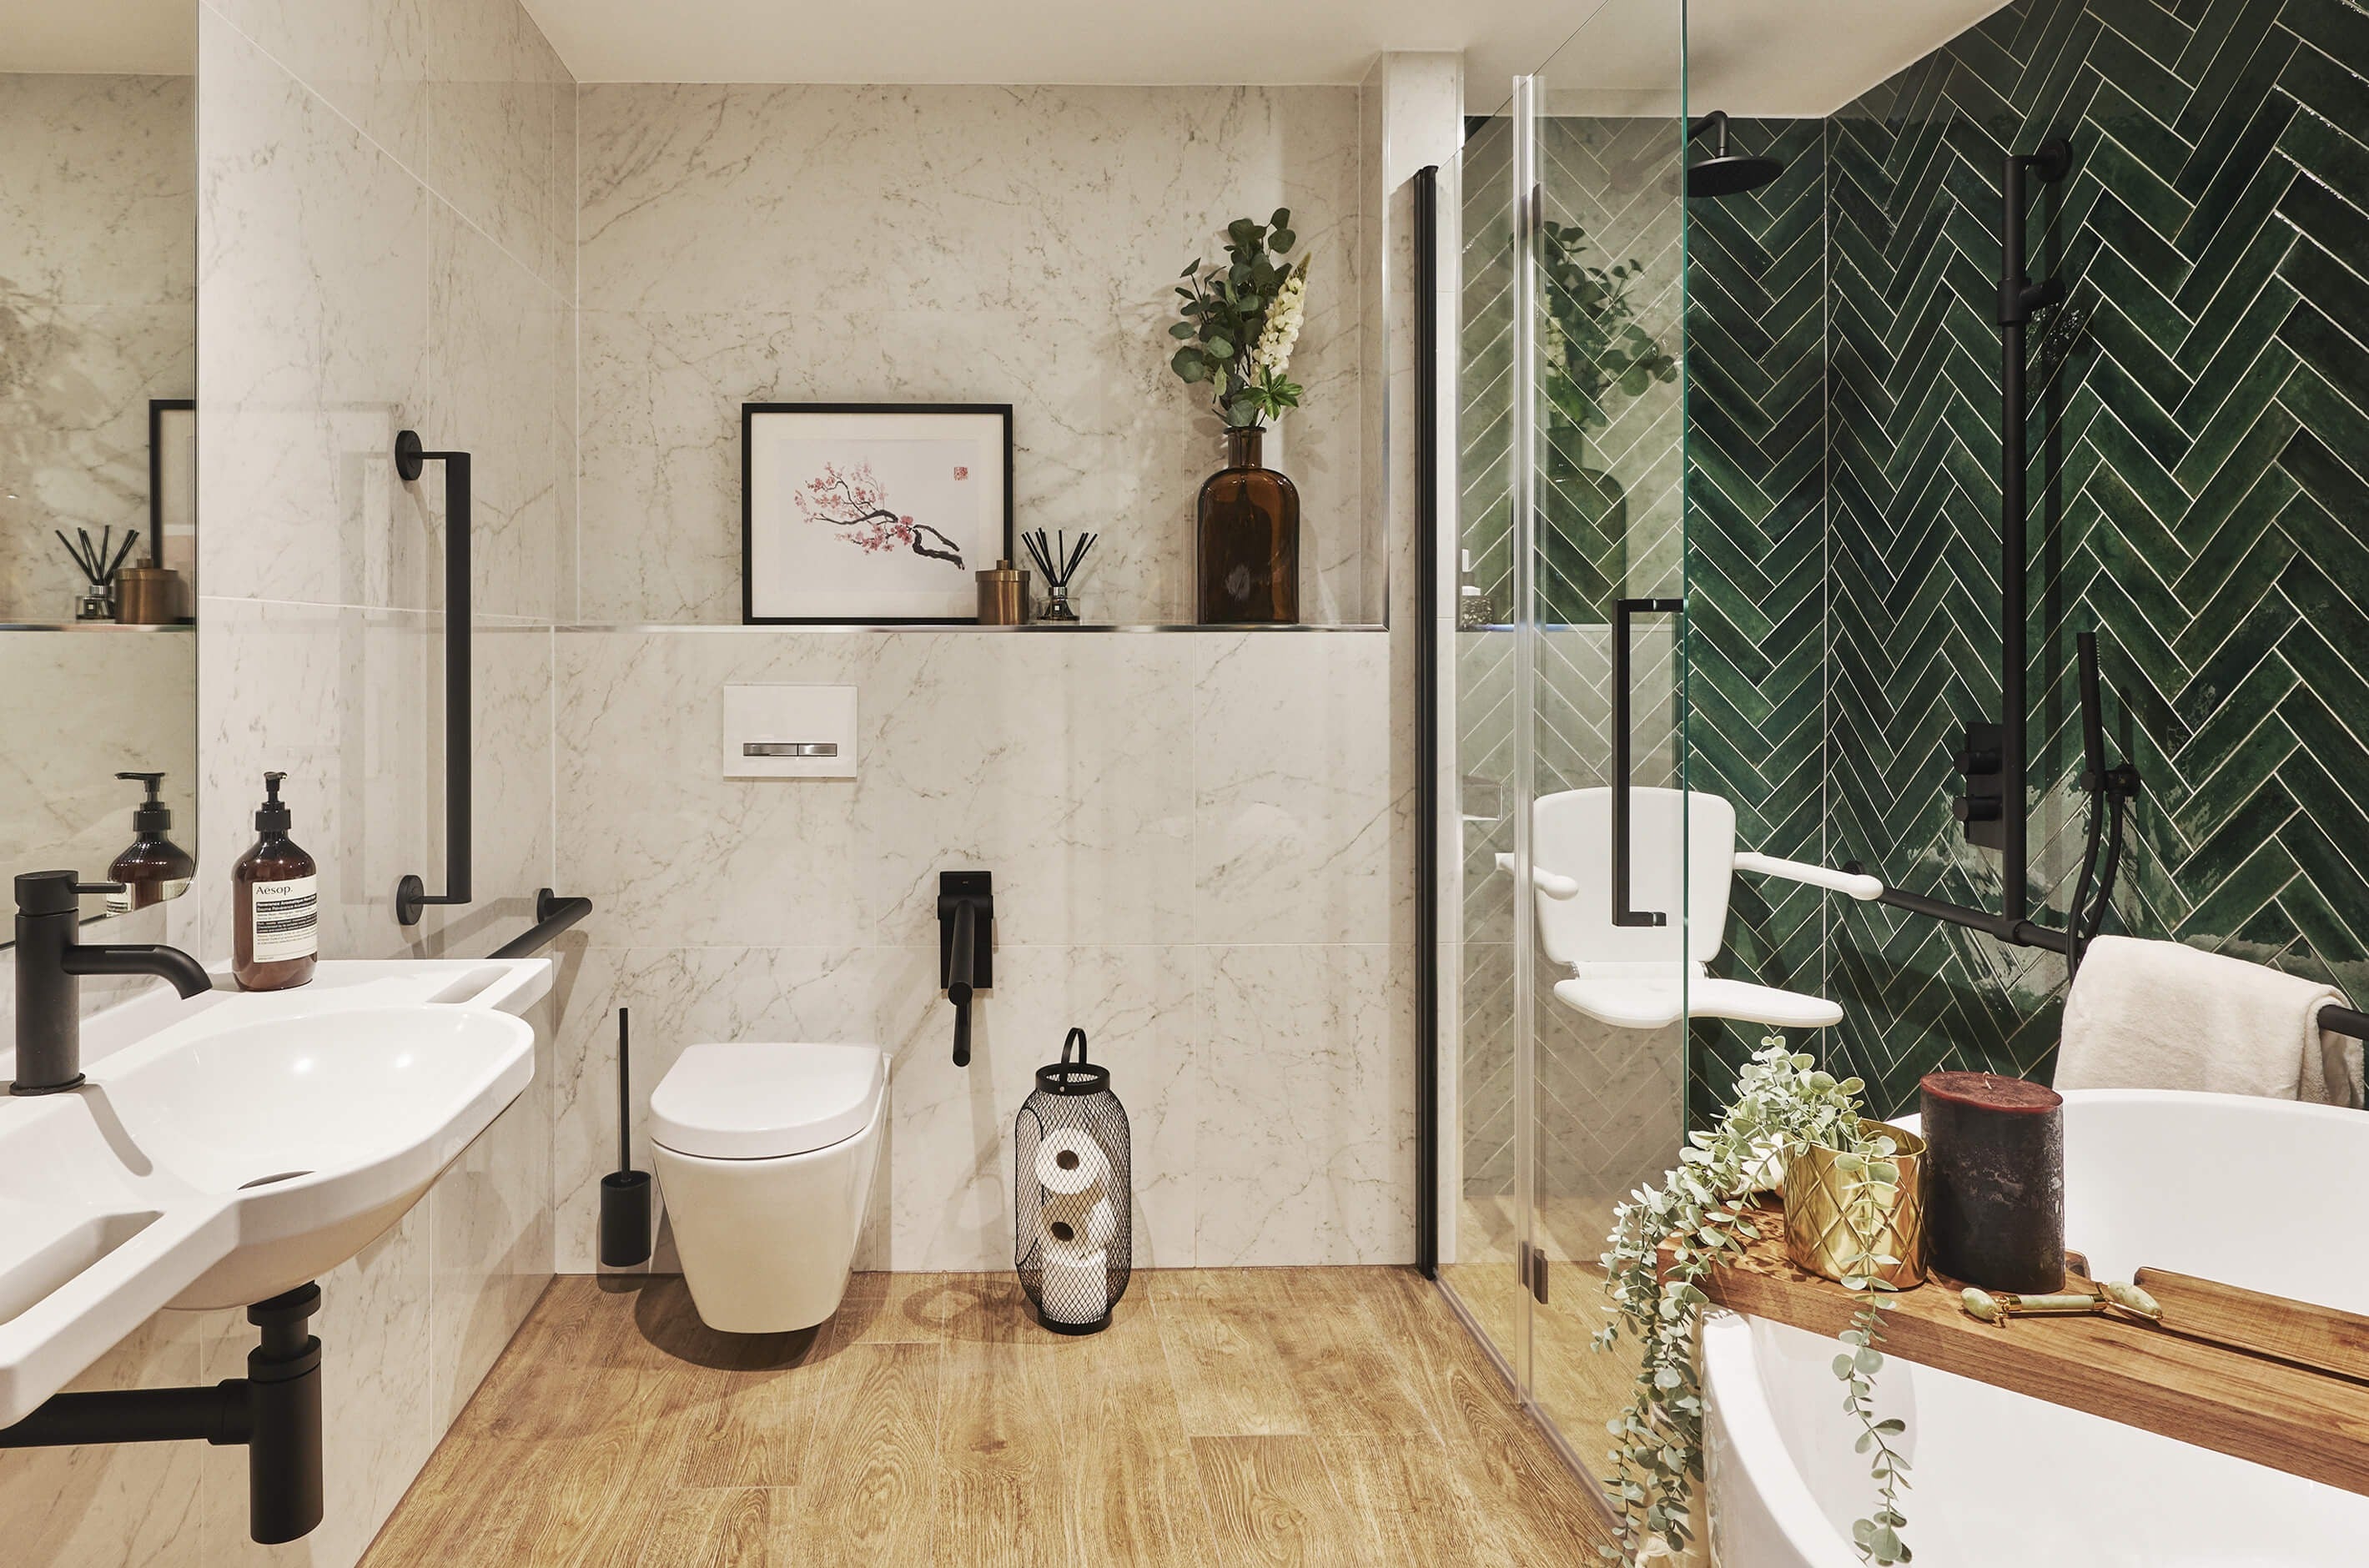 Fine & Able accessible bathroom with white marble and rich green tiles, matt black grab rails and wood effect floor tiles.